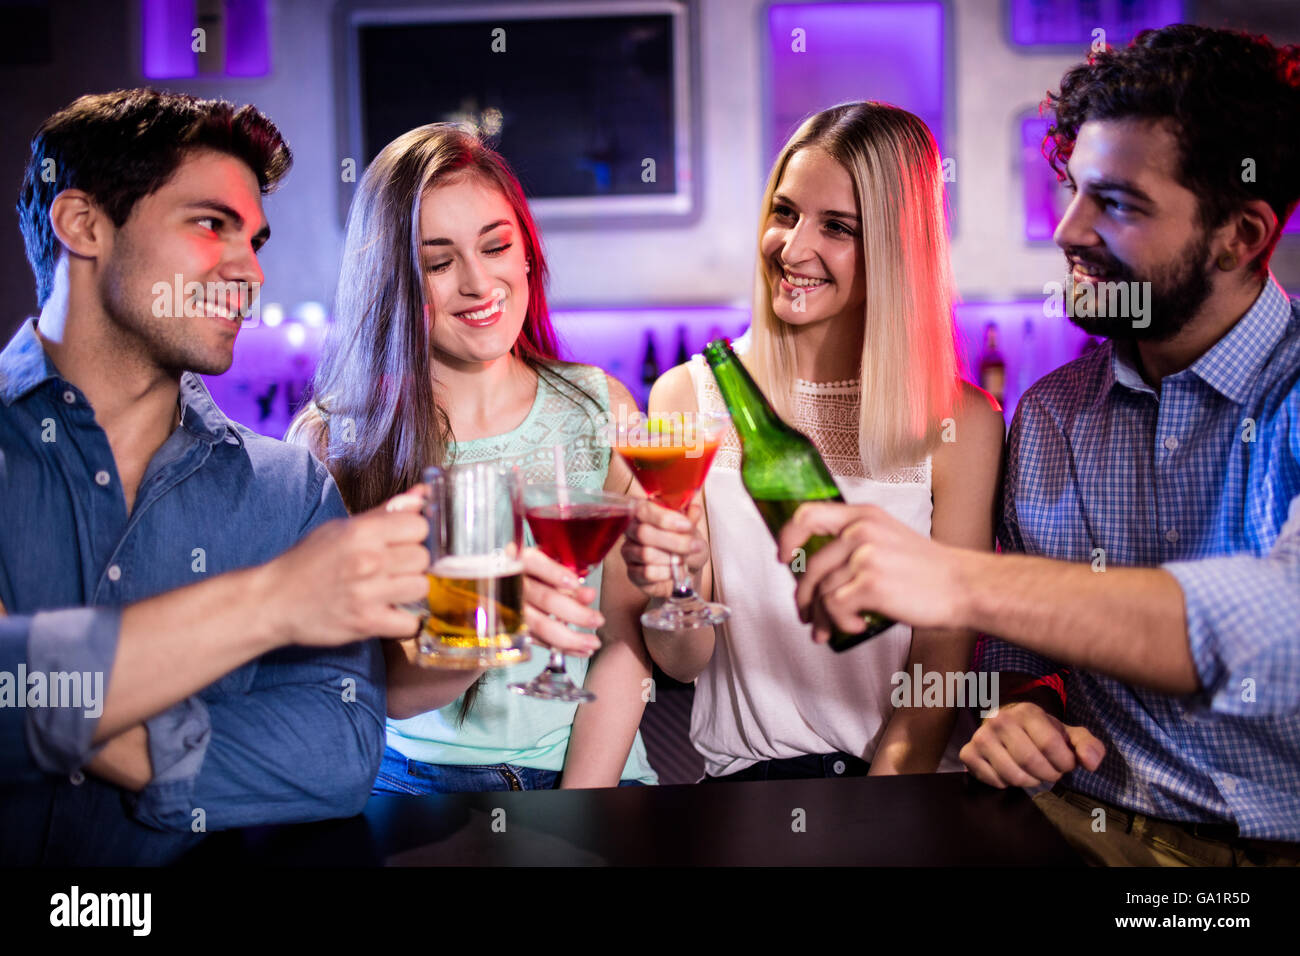 Group of friends toasting cocktail, beer bottle and beer glass at bar counter Stock Photo